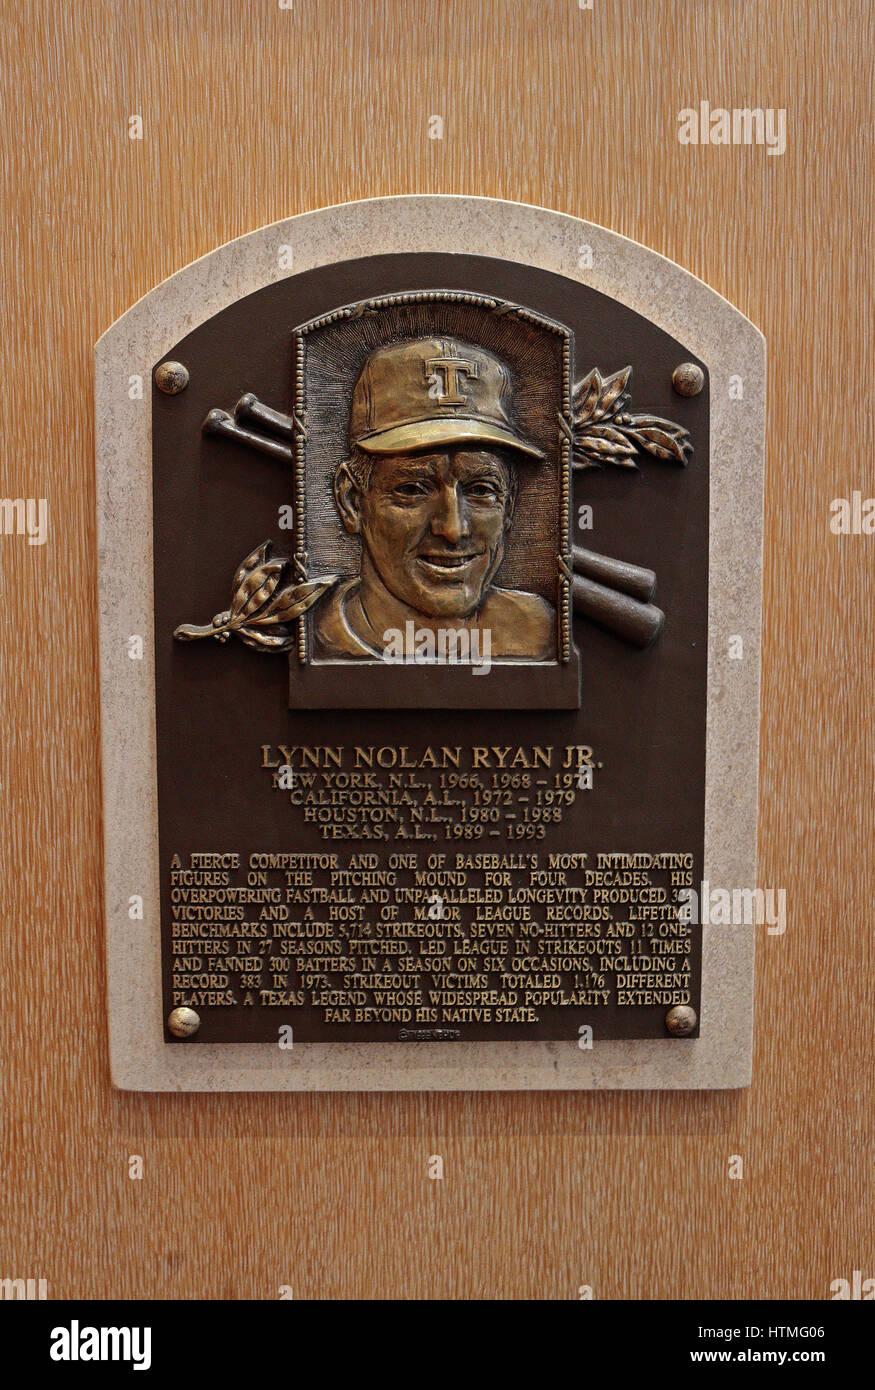 Memorial plaque pitcher Nolan Ryan for in the Hall of Fame Gallery,  National Baseball Hall of Fame & Museum, Cooperstown, NY, USA Stock Photo -  Alamy